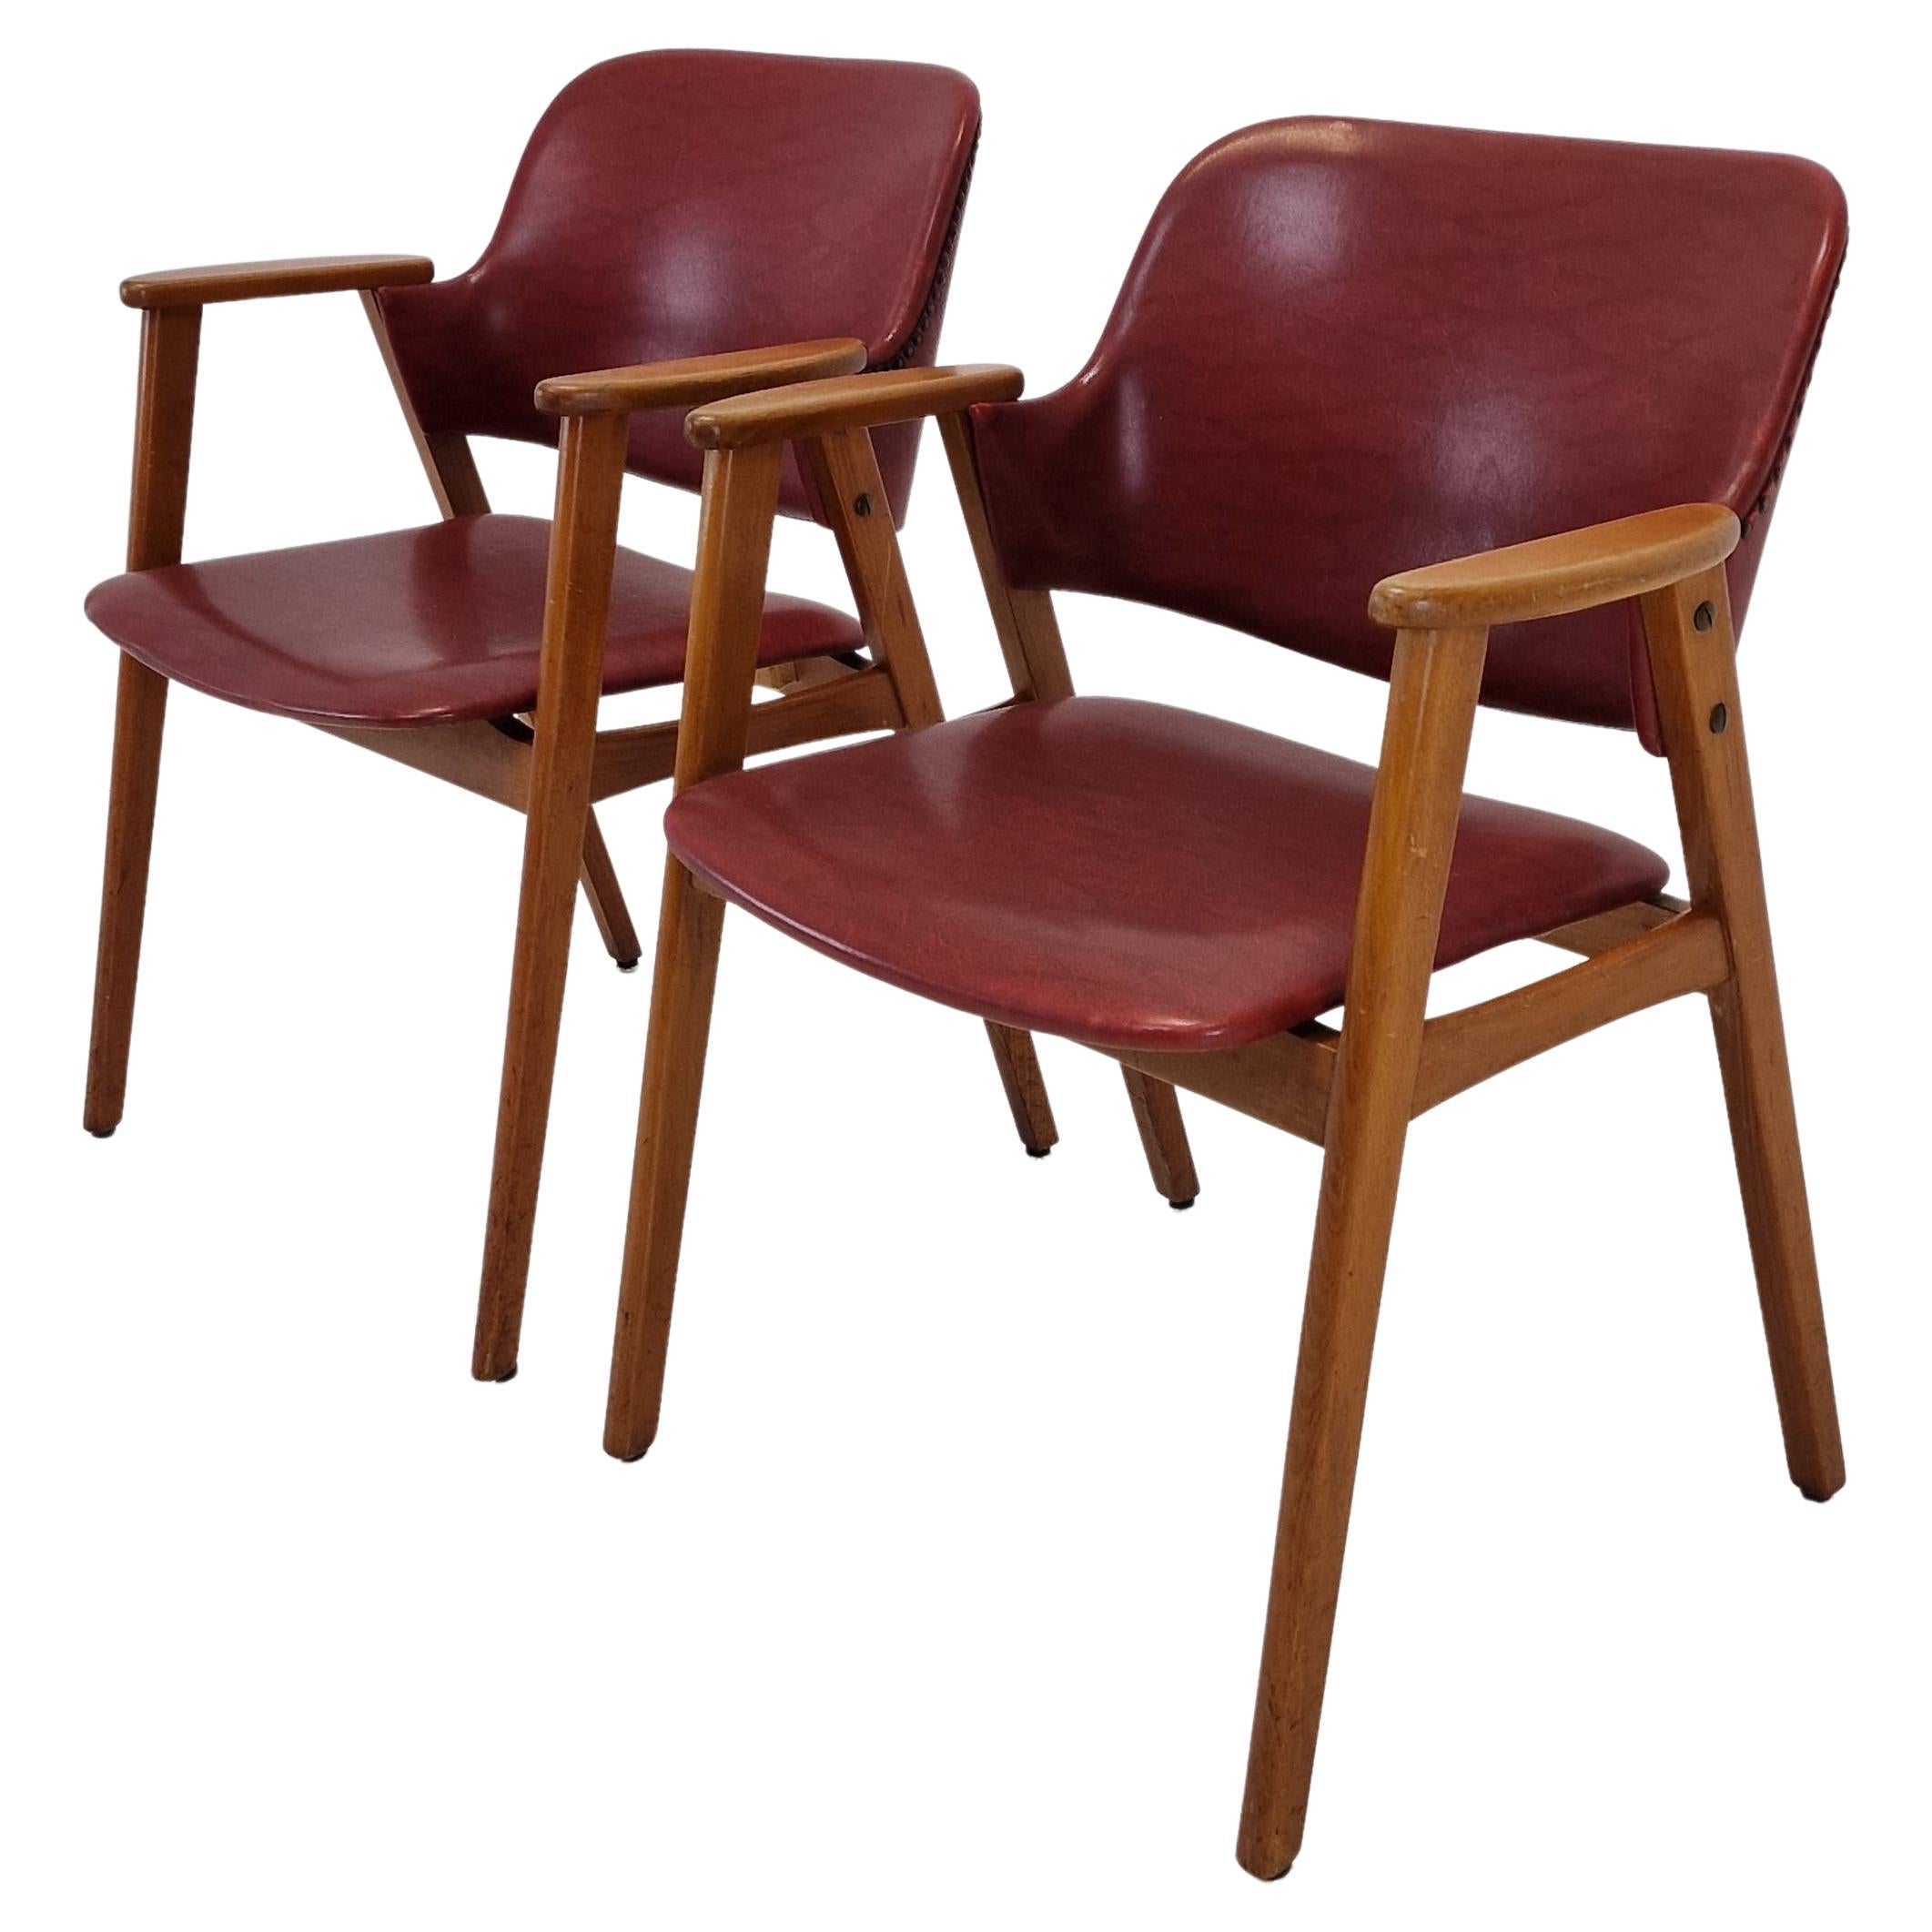 Midcentury Dining or Restaurant Chairs by Cees Braakman for Pastoe, 1950s